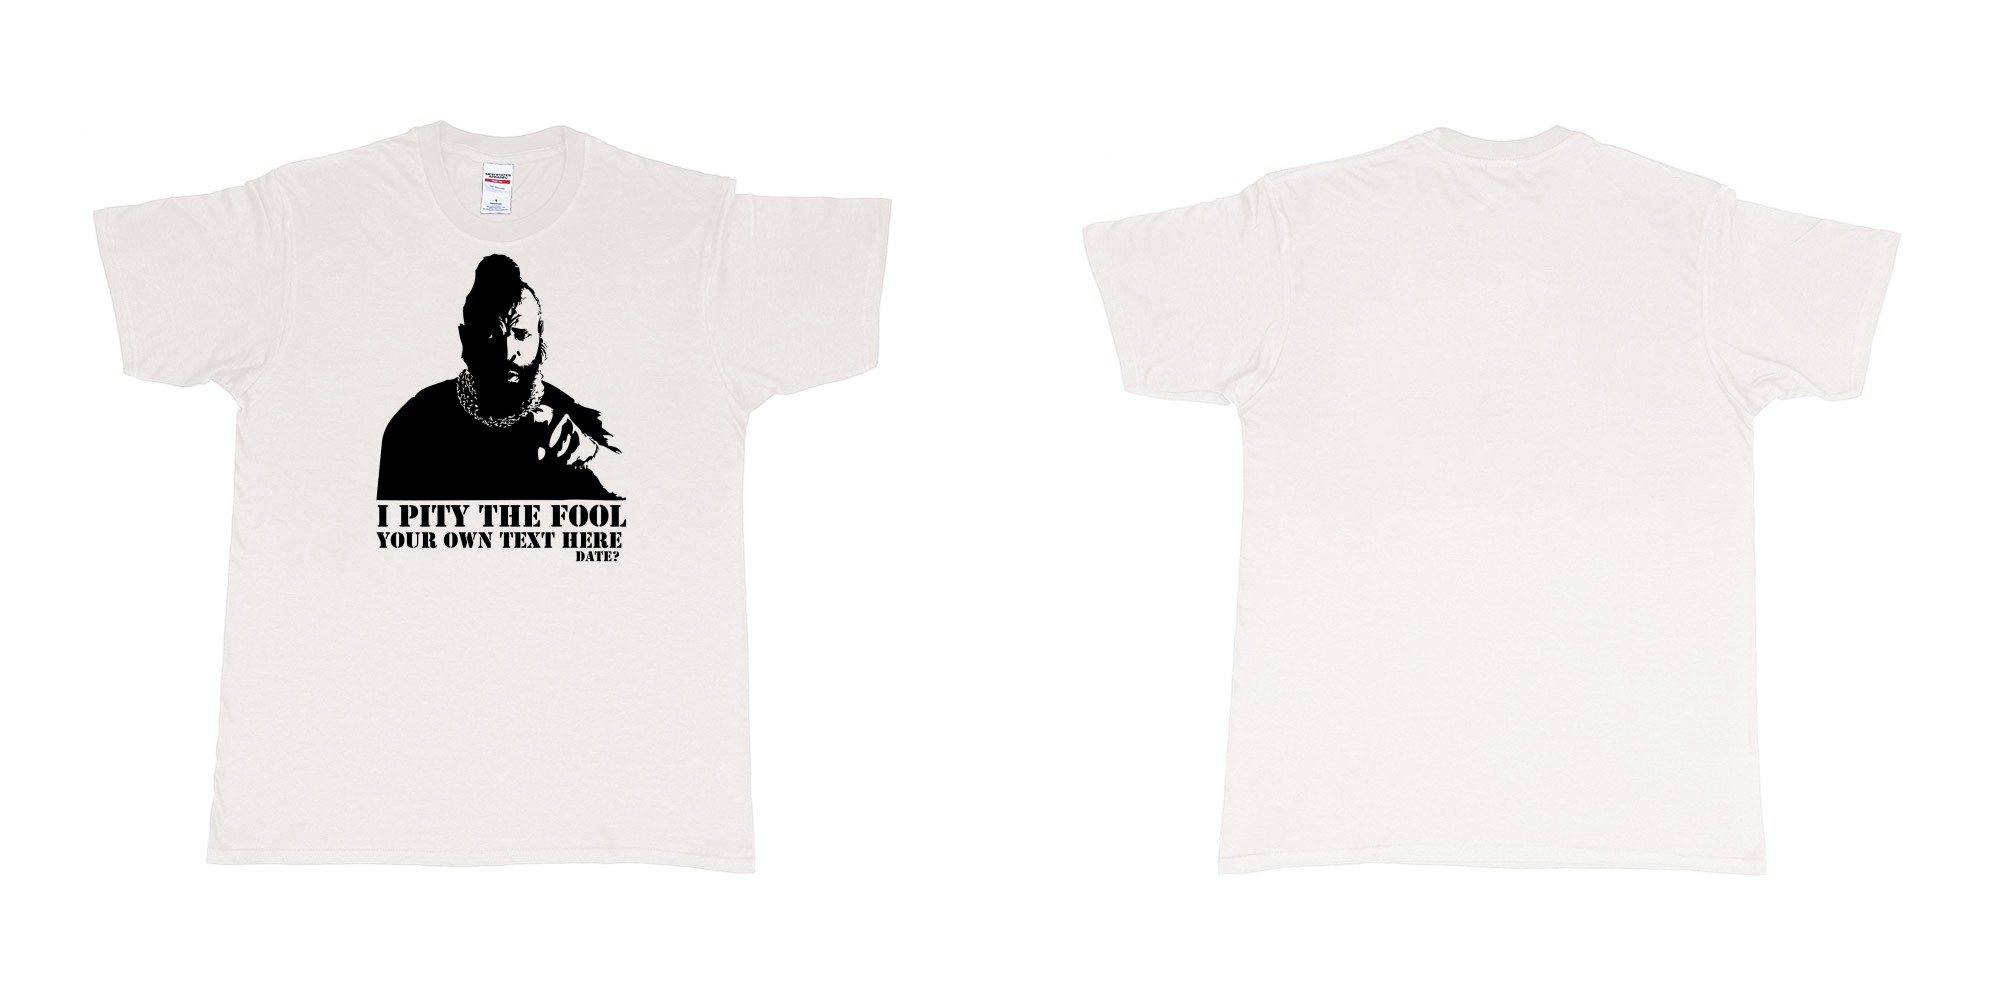 Custom tshirt design I pity the fool in fabric color white choice your own text made in Bali by The Pirate Way